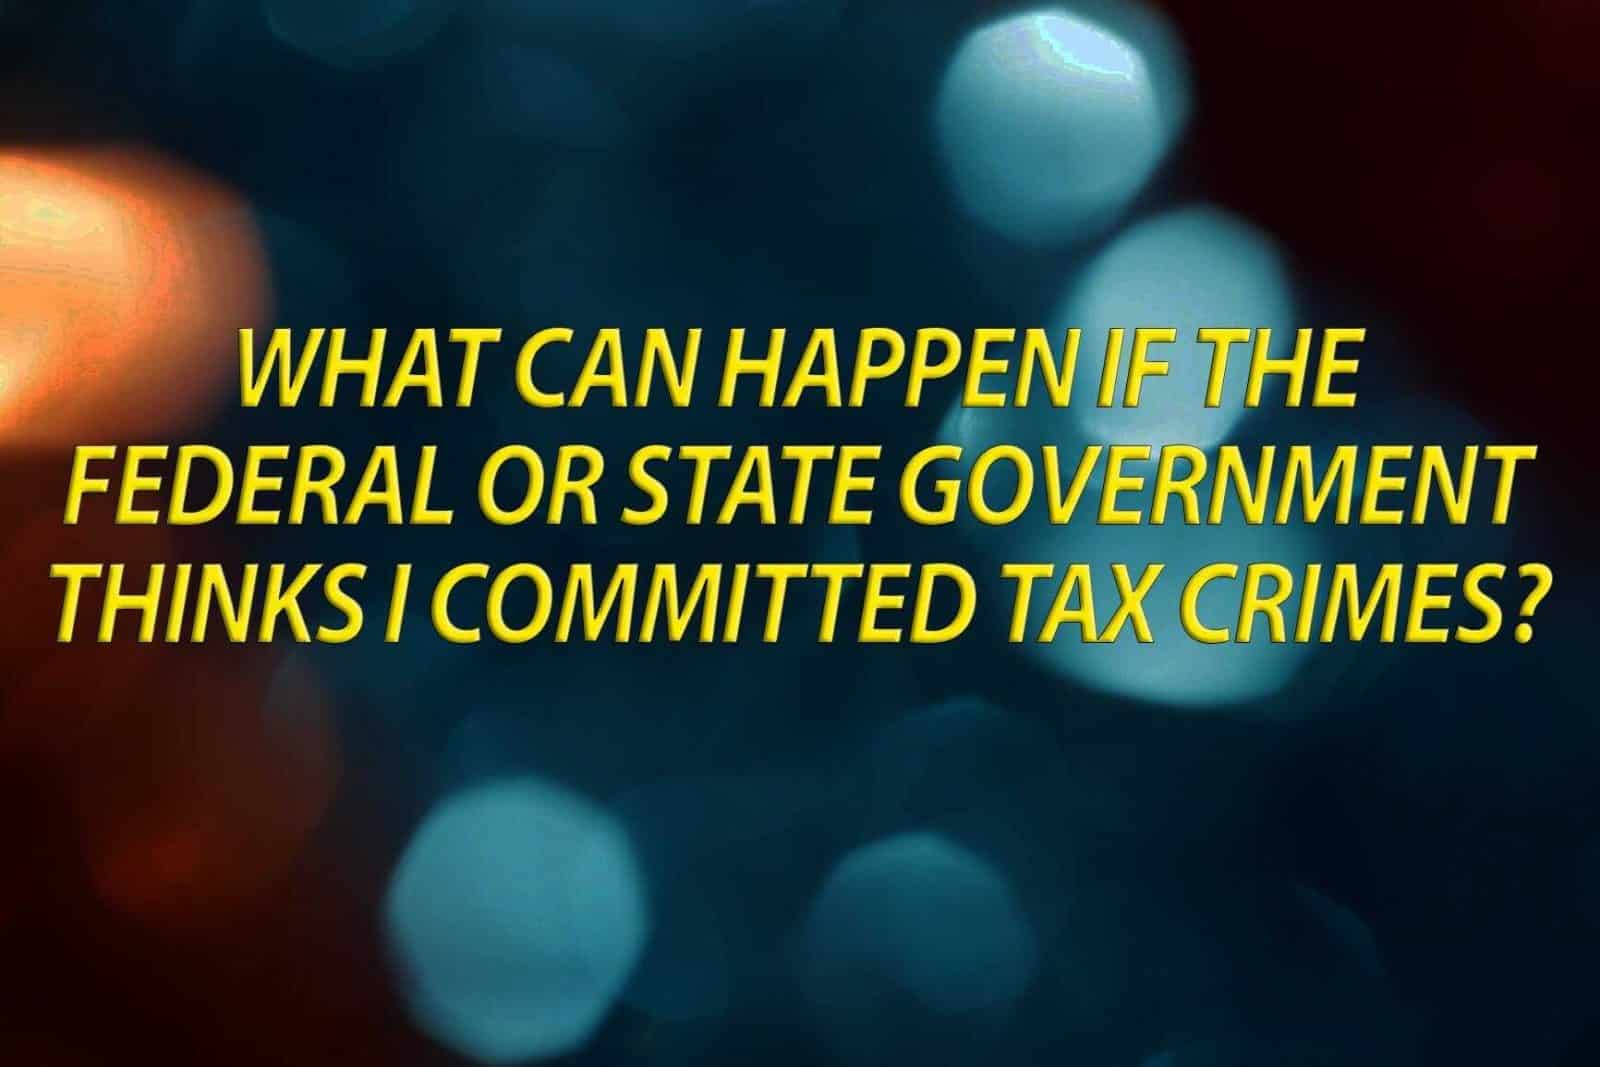 What can happen if the government thinks I commited a tax crime